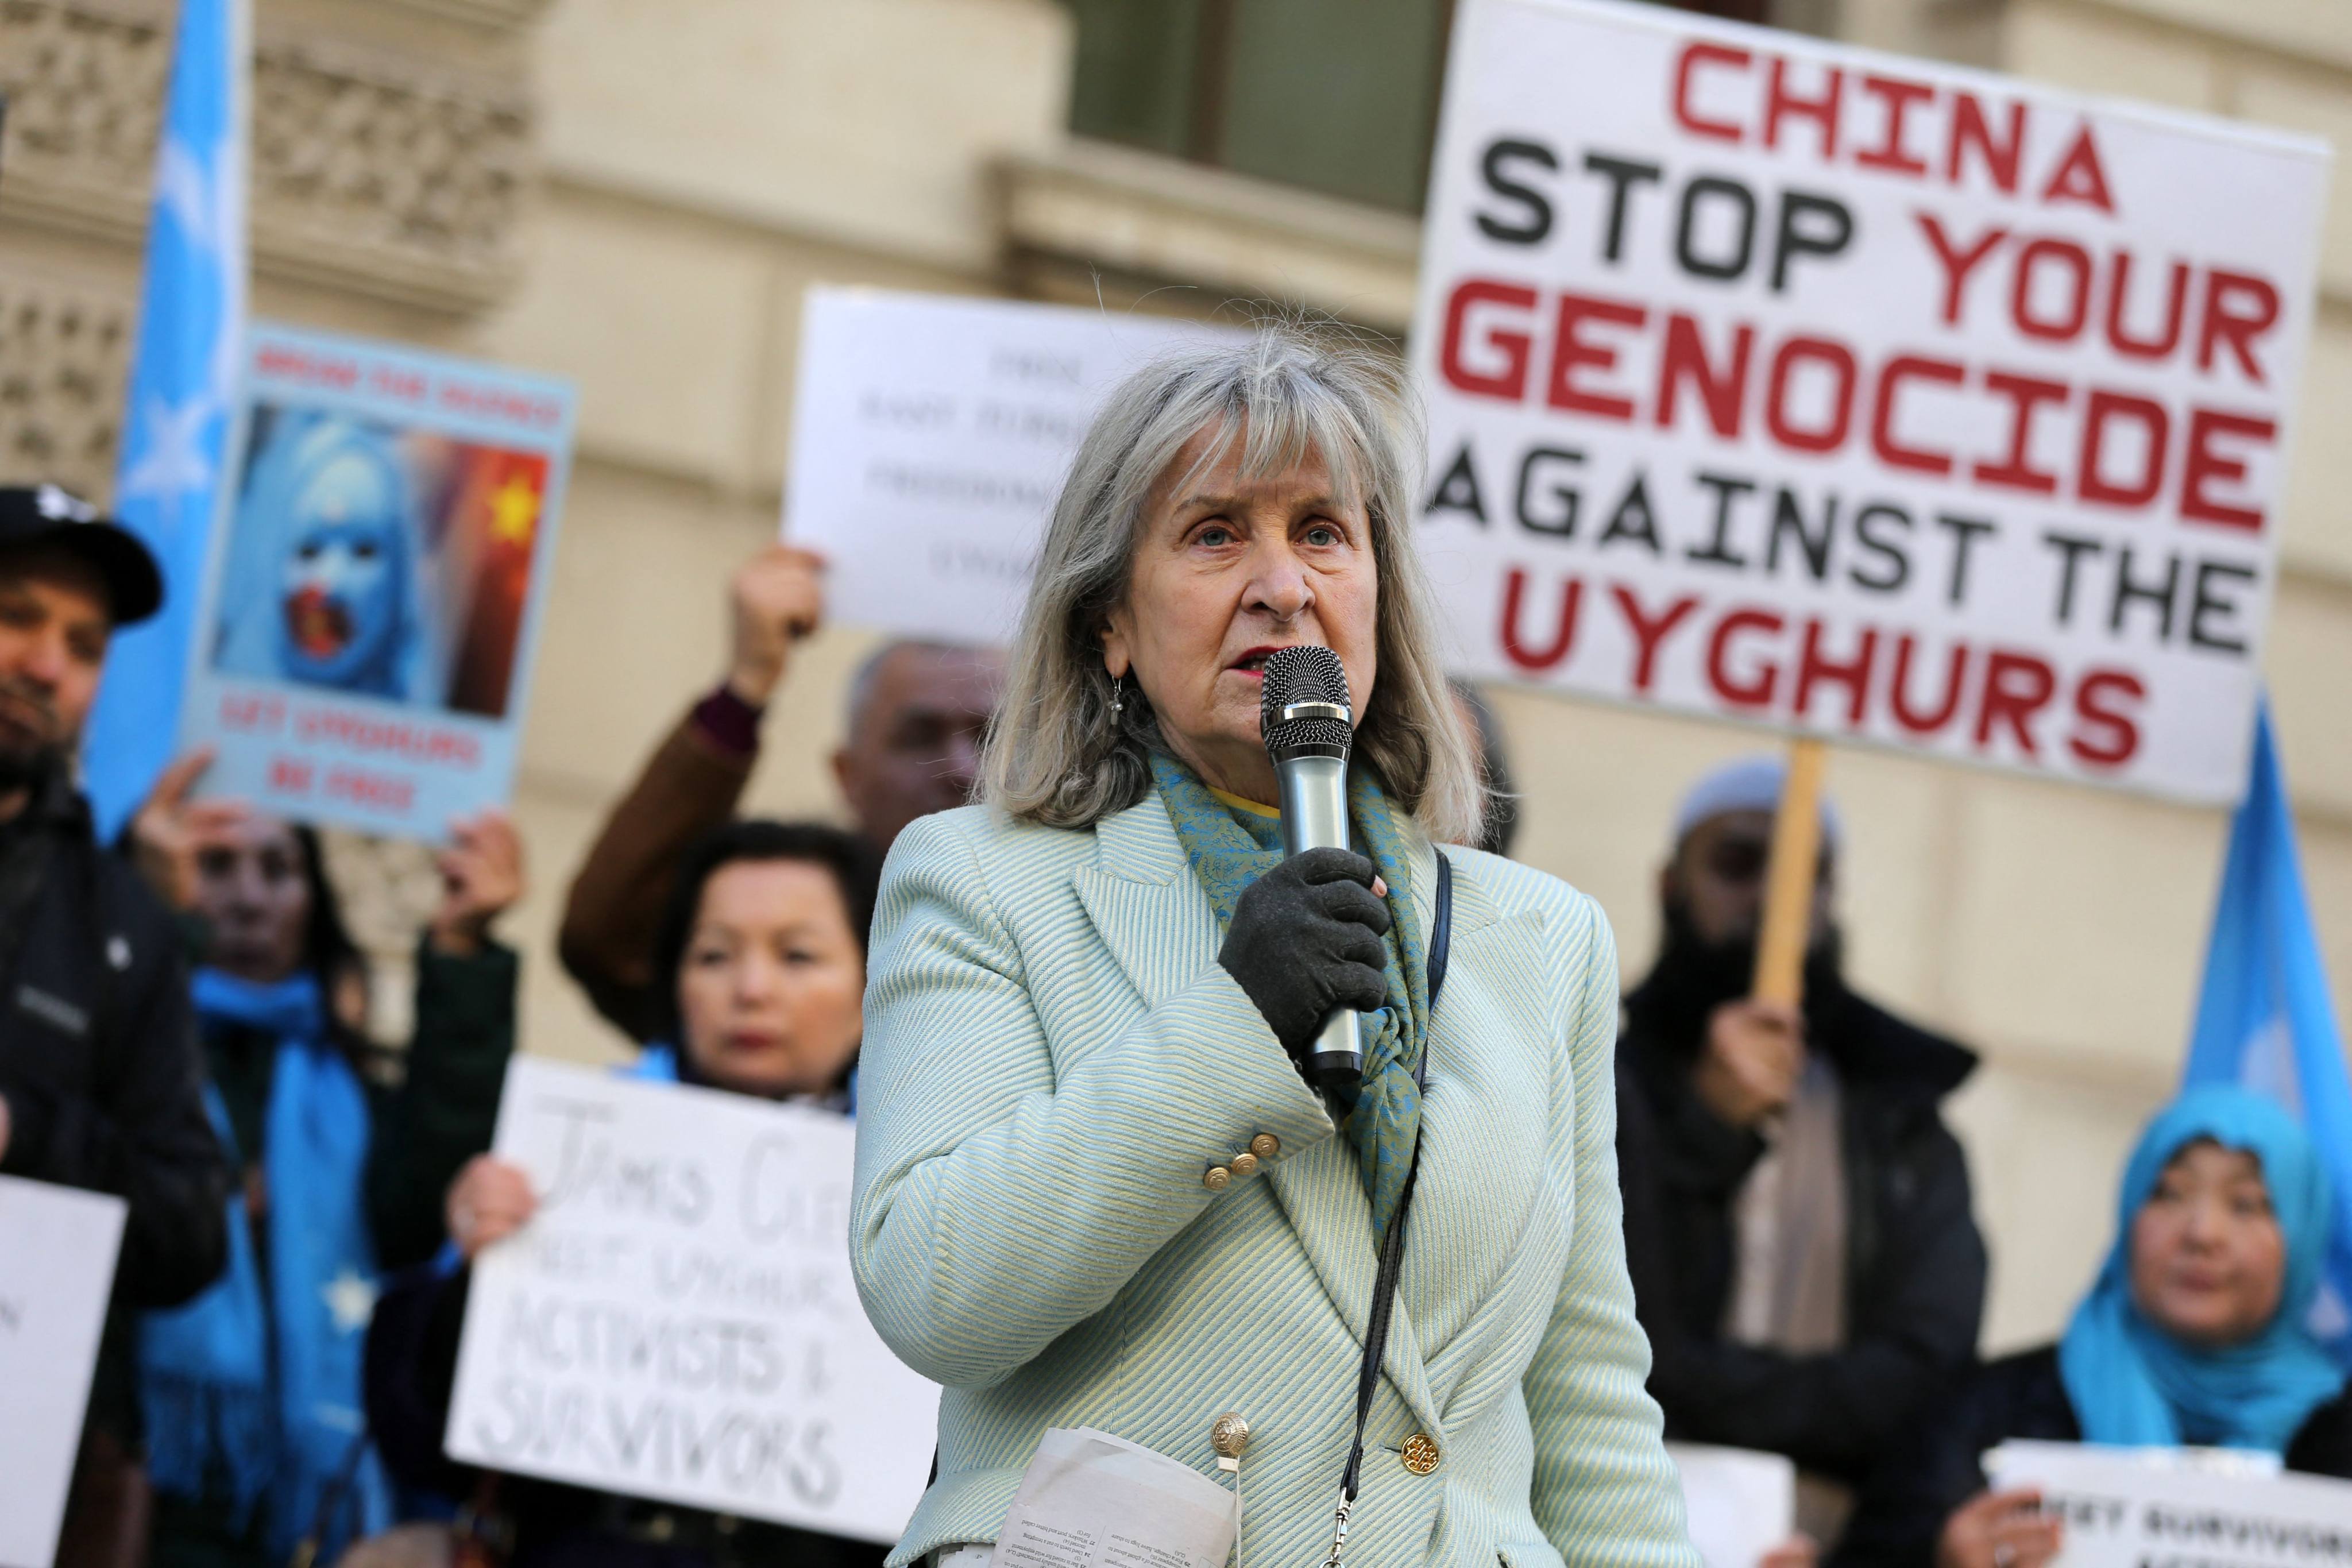 EU leaders and others, including those at a vigil in London on February 13, are stepping up their criticism of China for its treatment of Uygurs and other suspected human rights violations. Photo: AFP